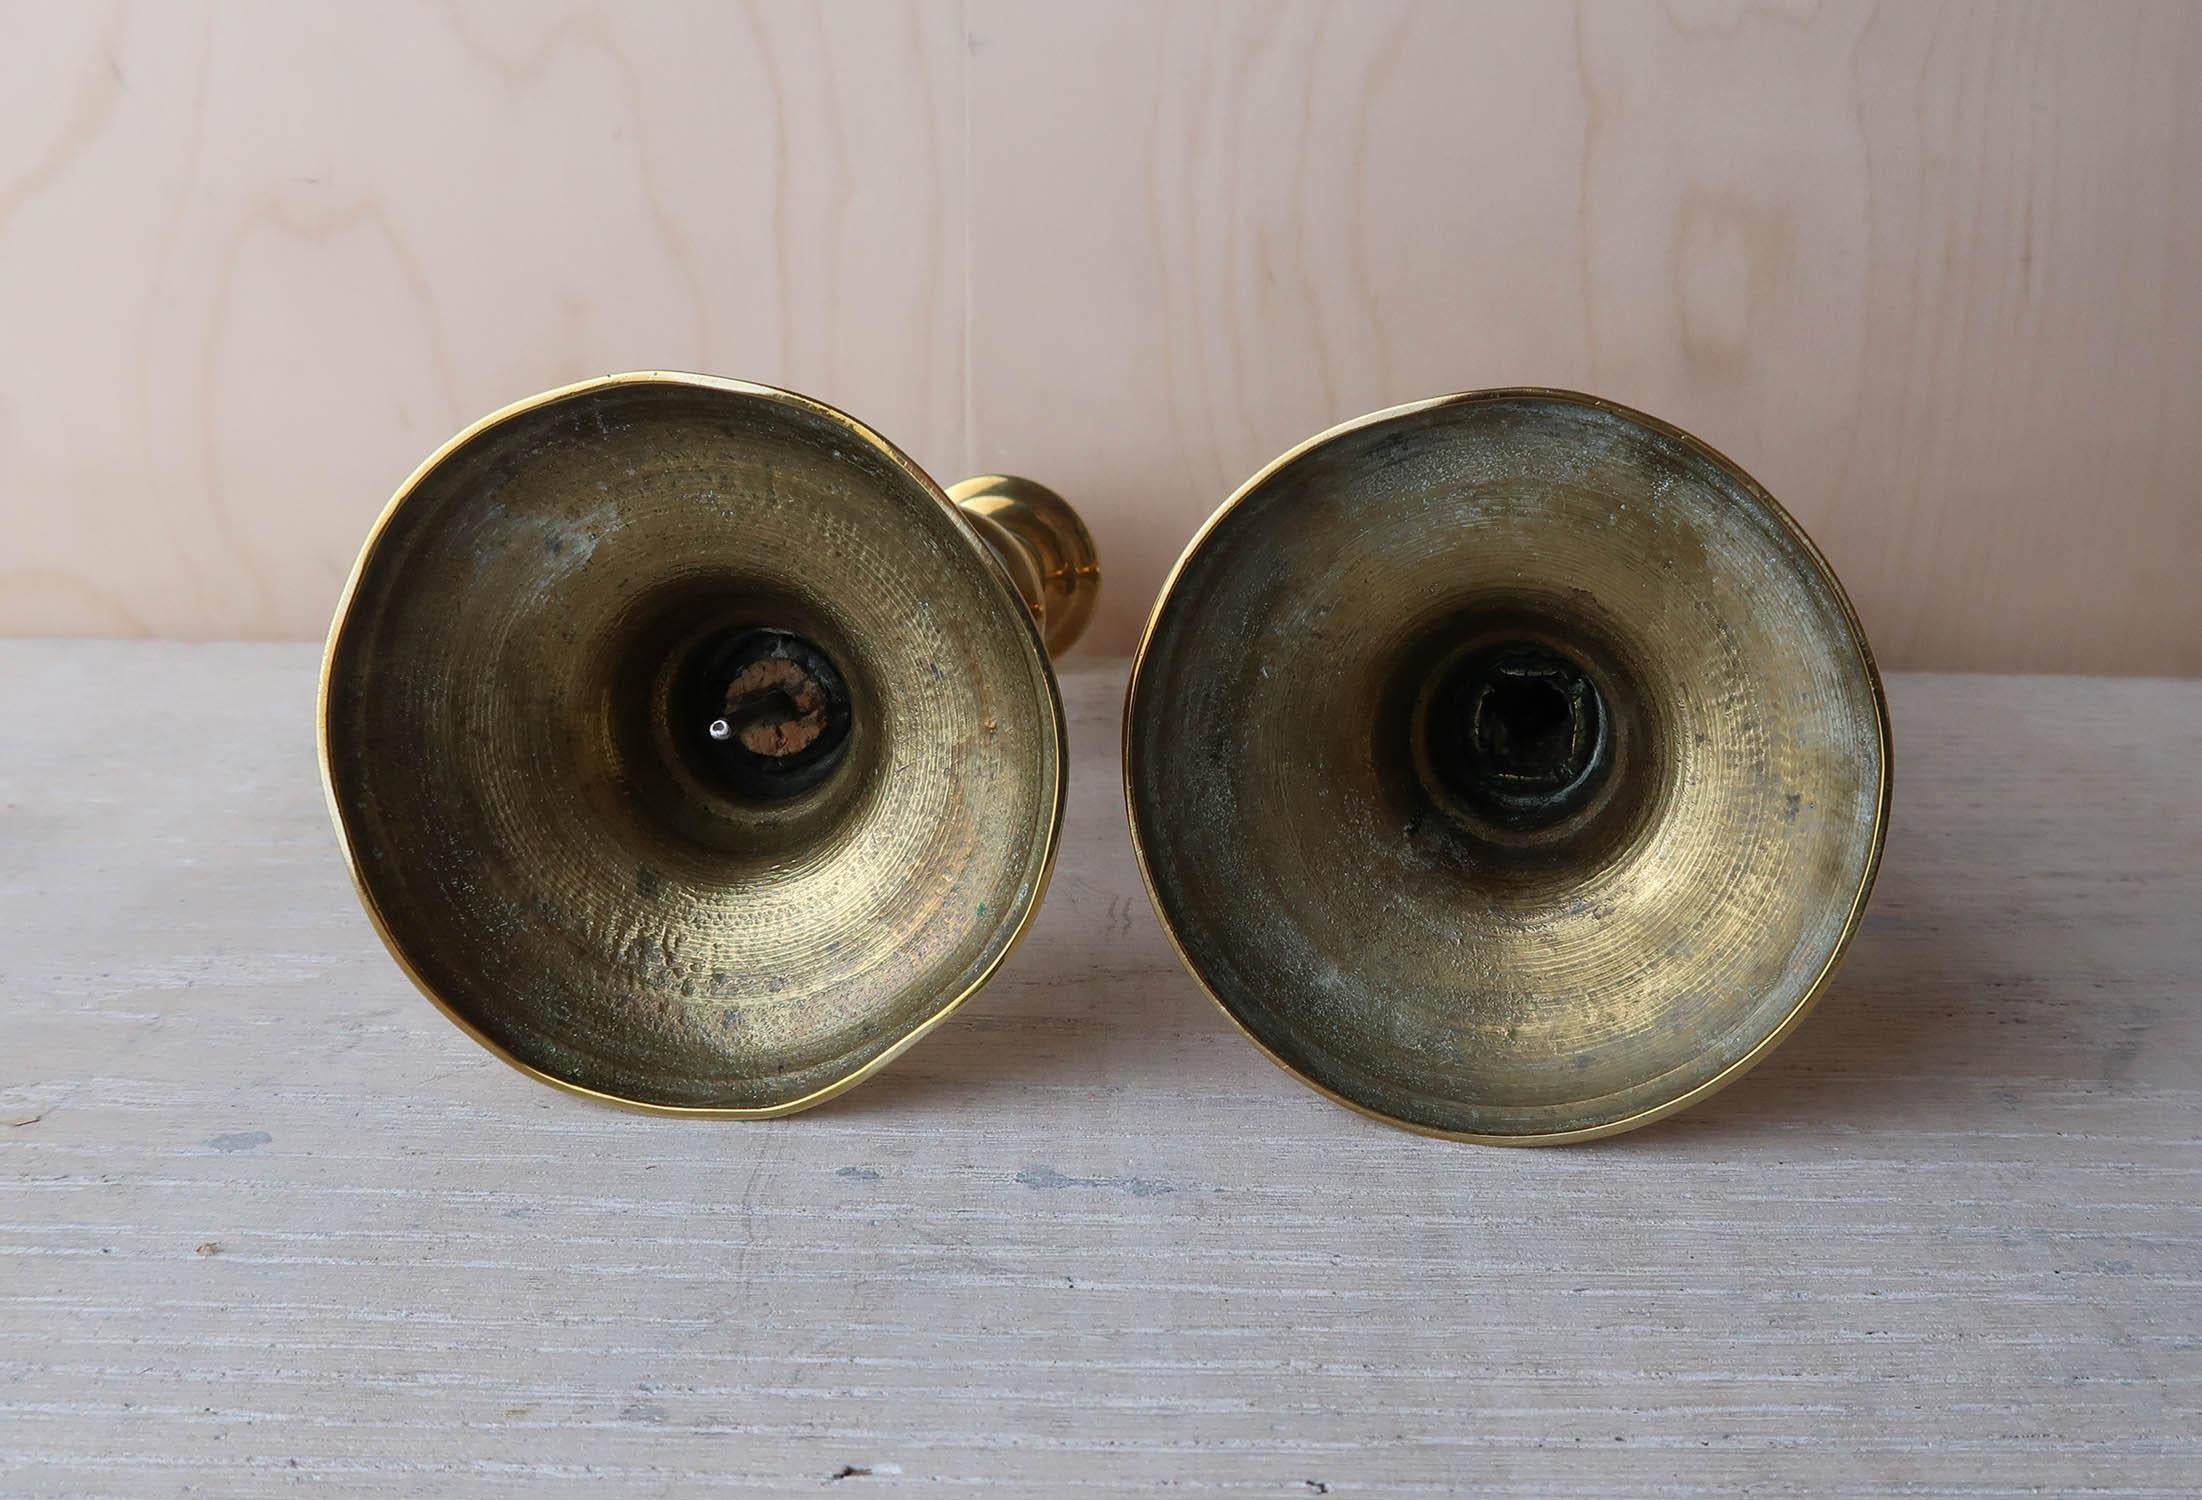 Rustic Pair of Antique Round Base Brass Candlesticks, English, 19th Century